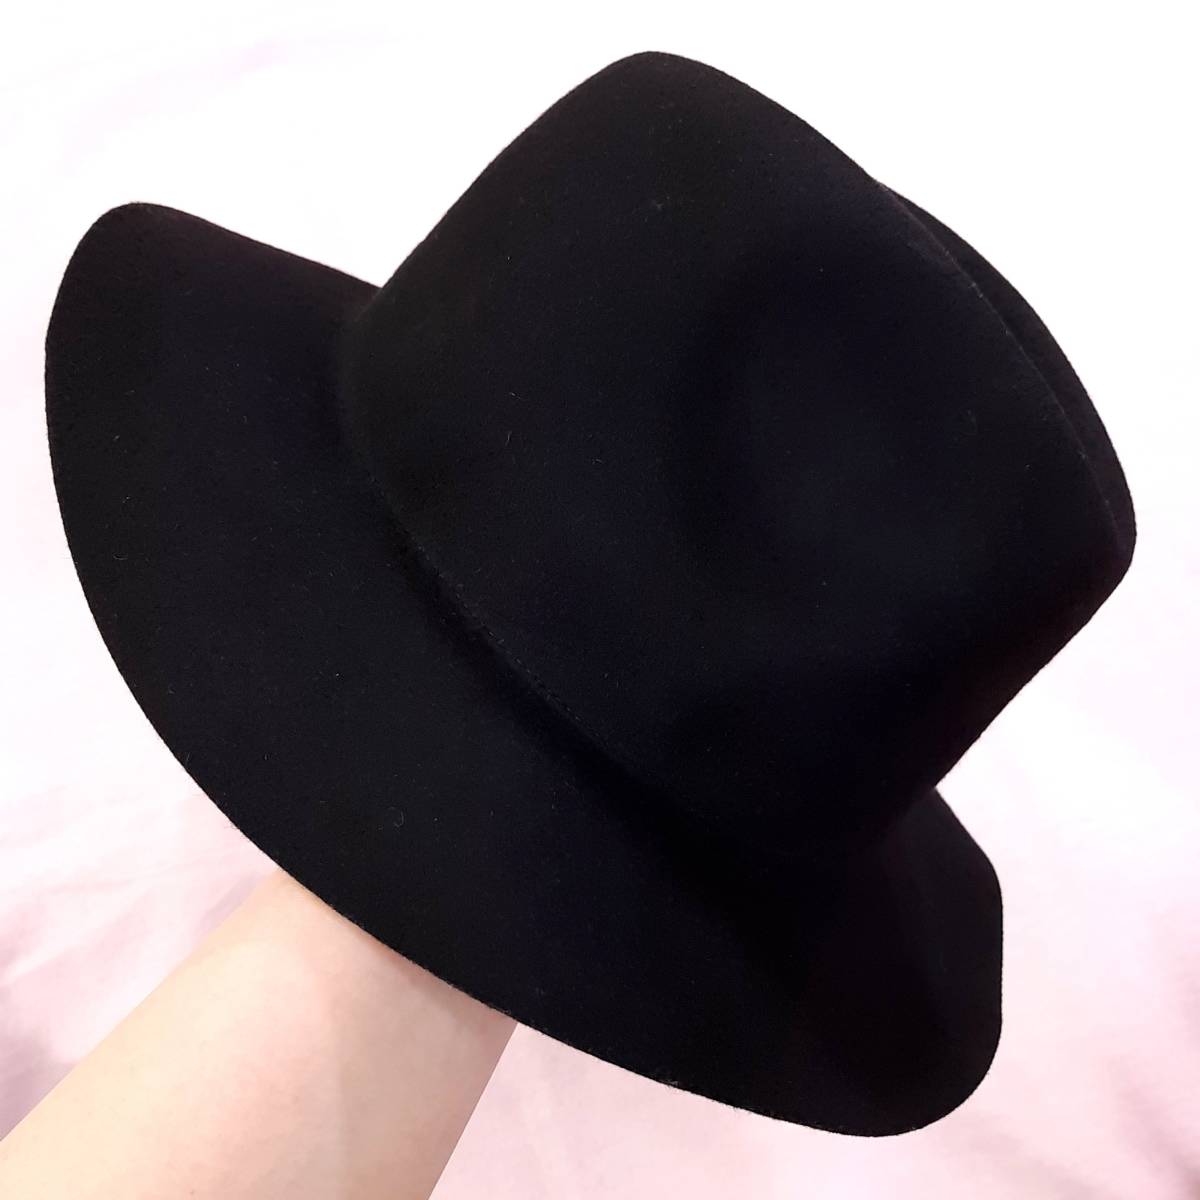 H5* new goods regular price 4190 jpy * fine quality wool 100% felt hat simple standard. soft hat wide‐brimmed hat hat * man and woman use 57.5.M size black black color 